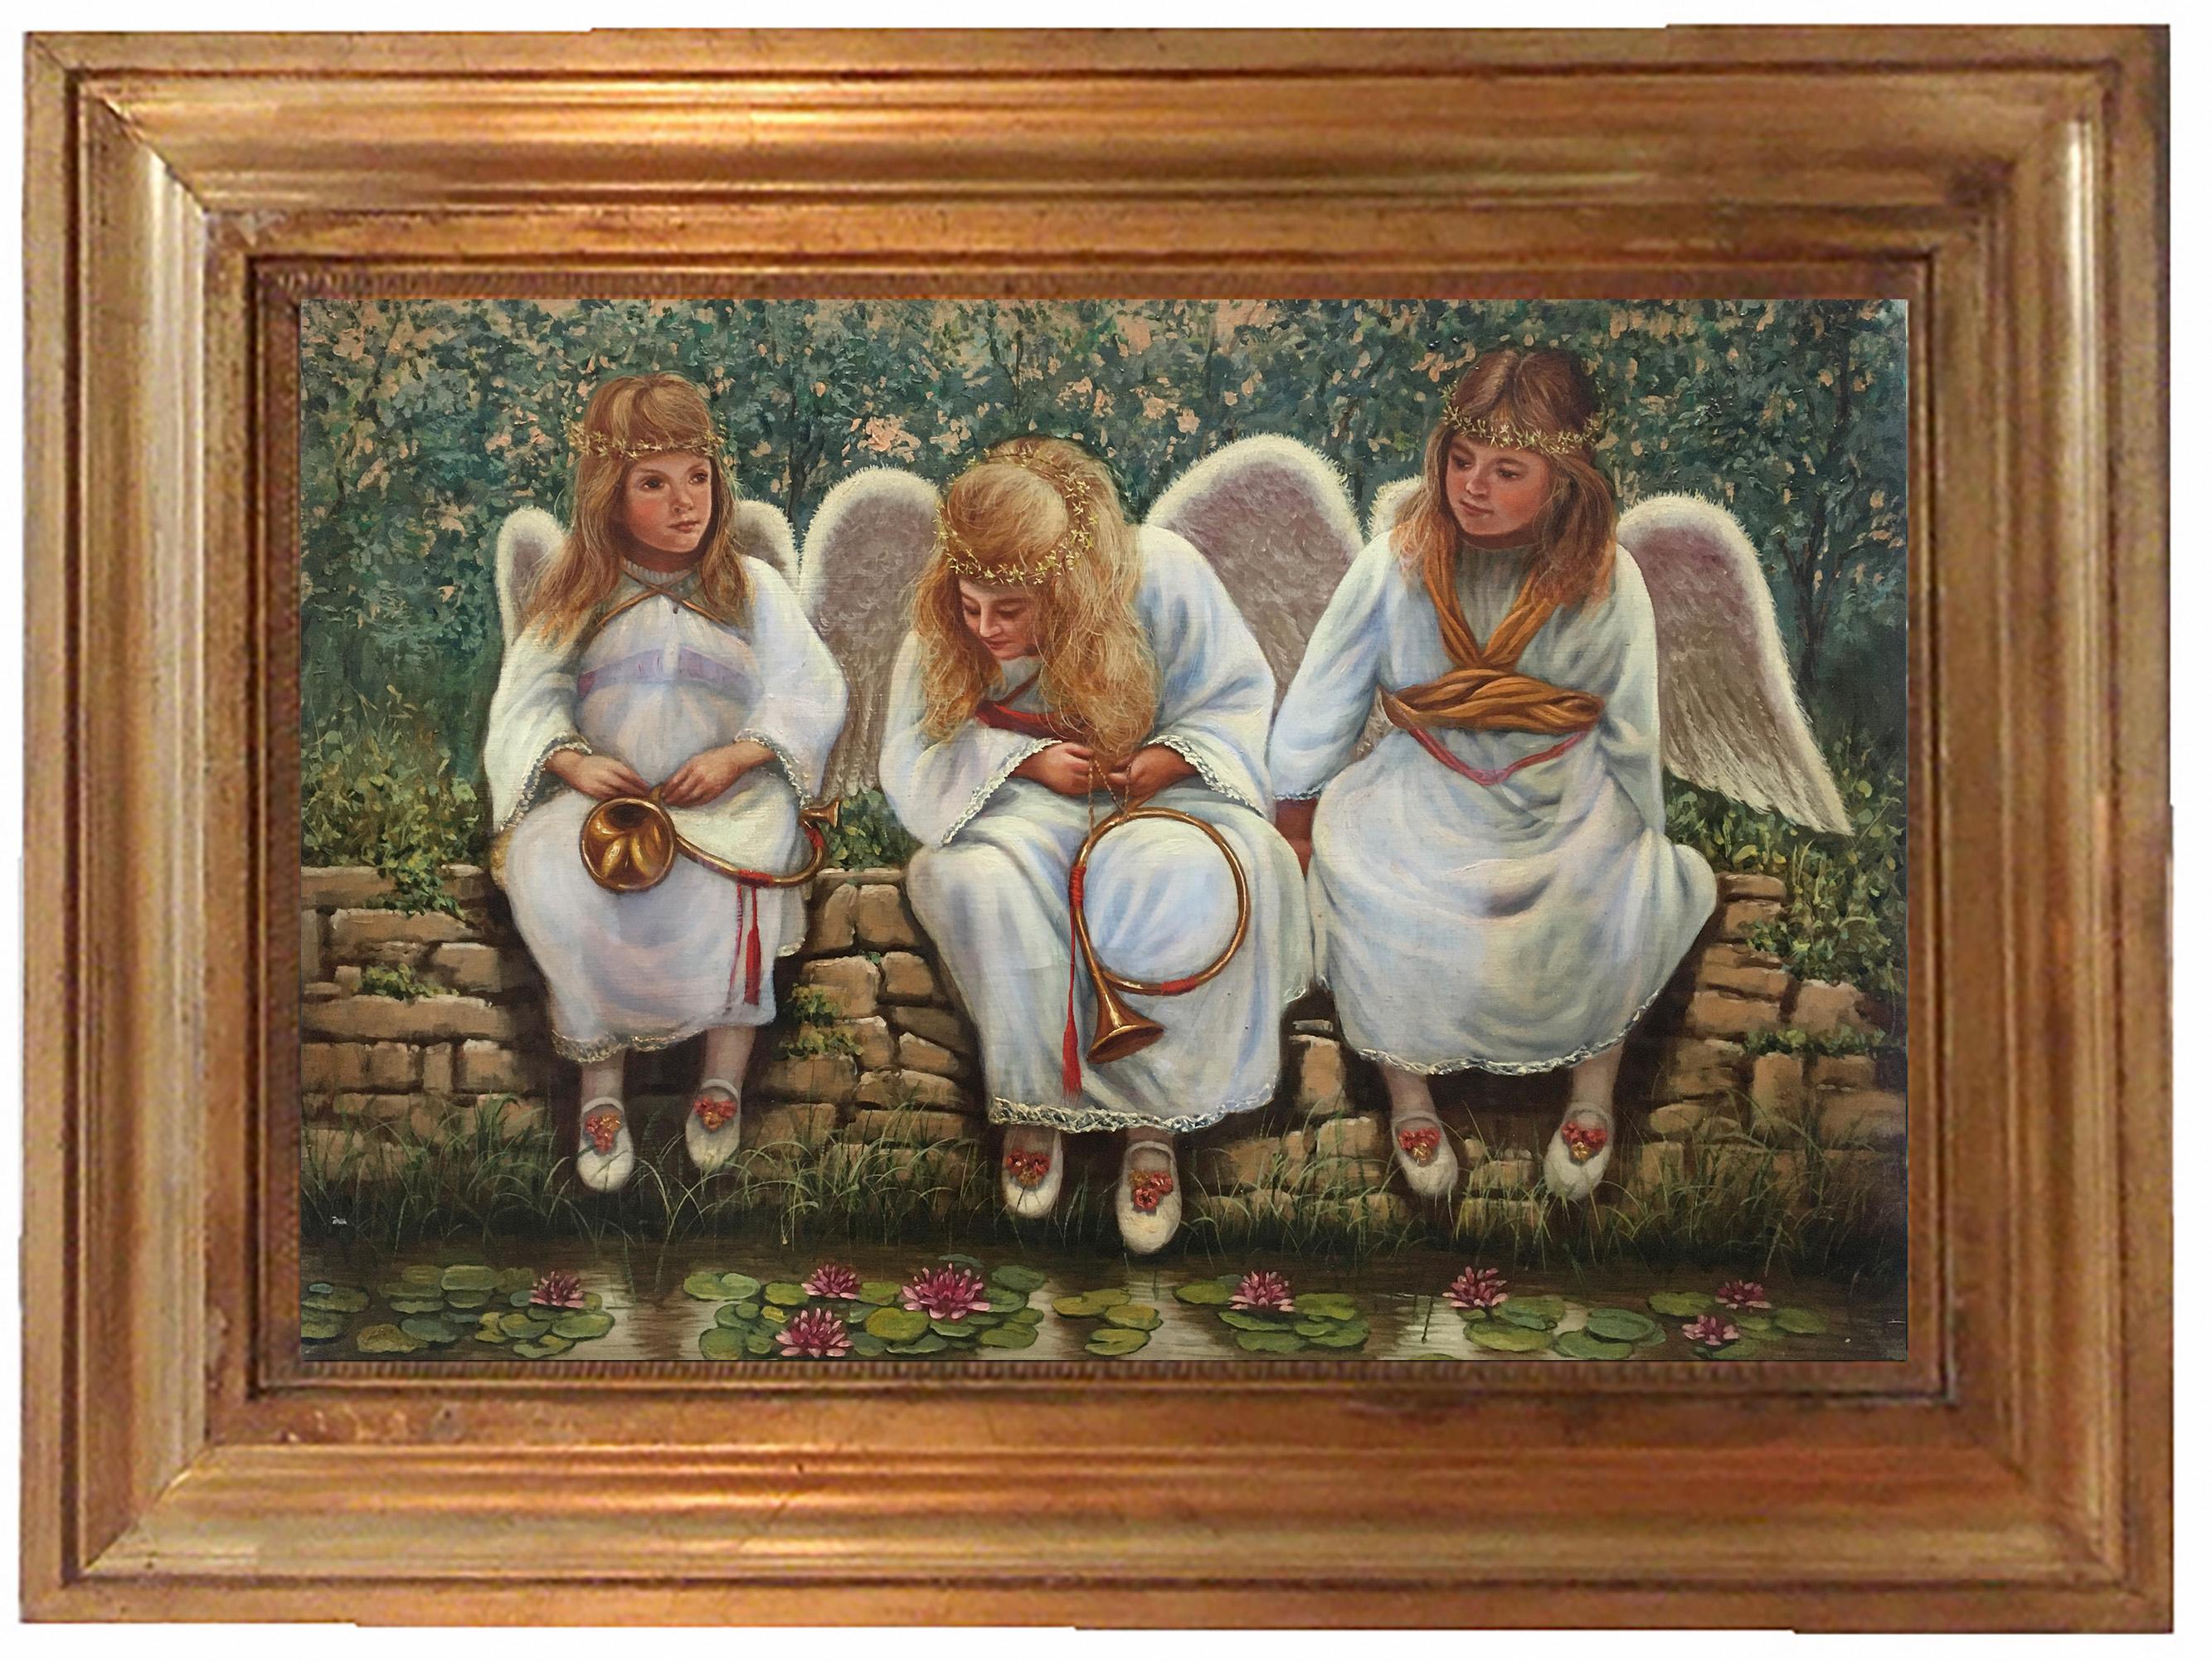 ANGELS ON THE WALL -  Ciro Morrone -  Figurative Italian Oil on Canvas Painting.